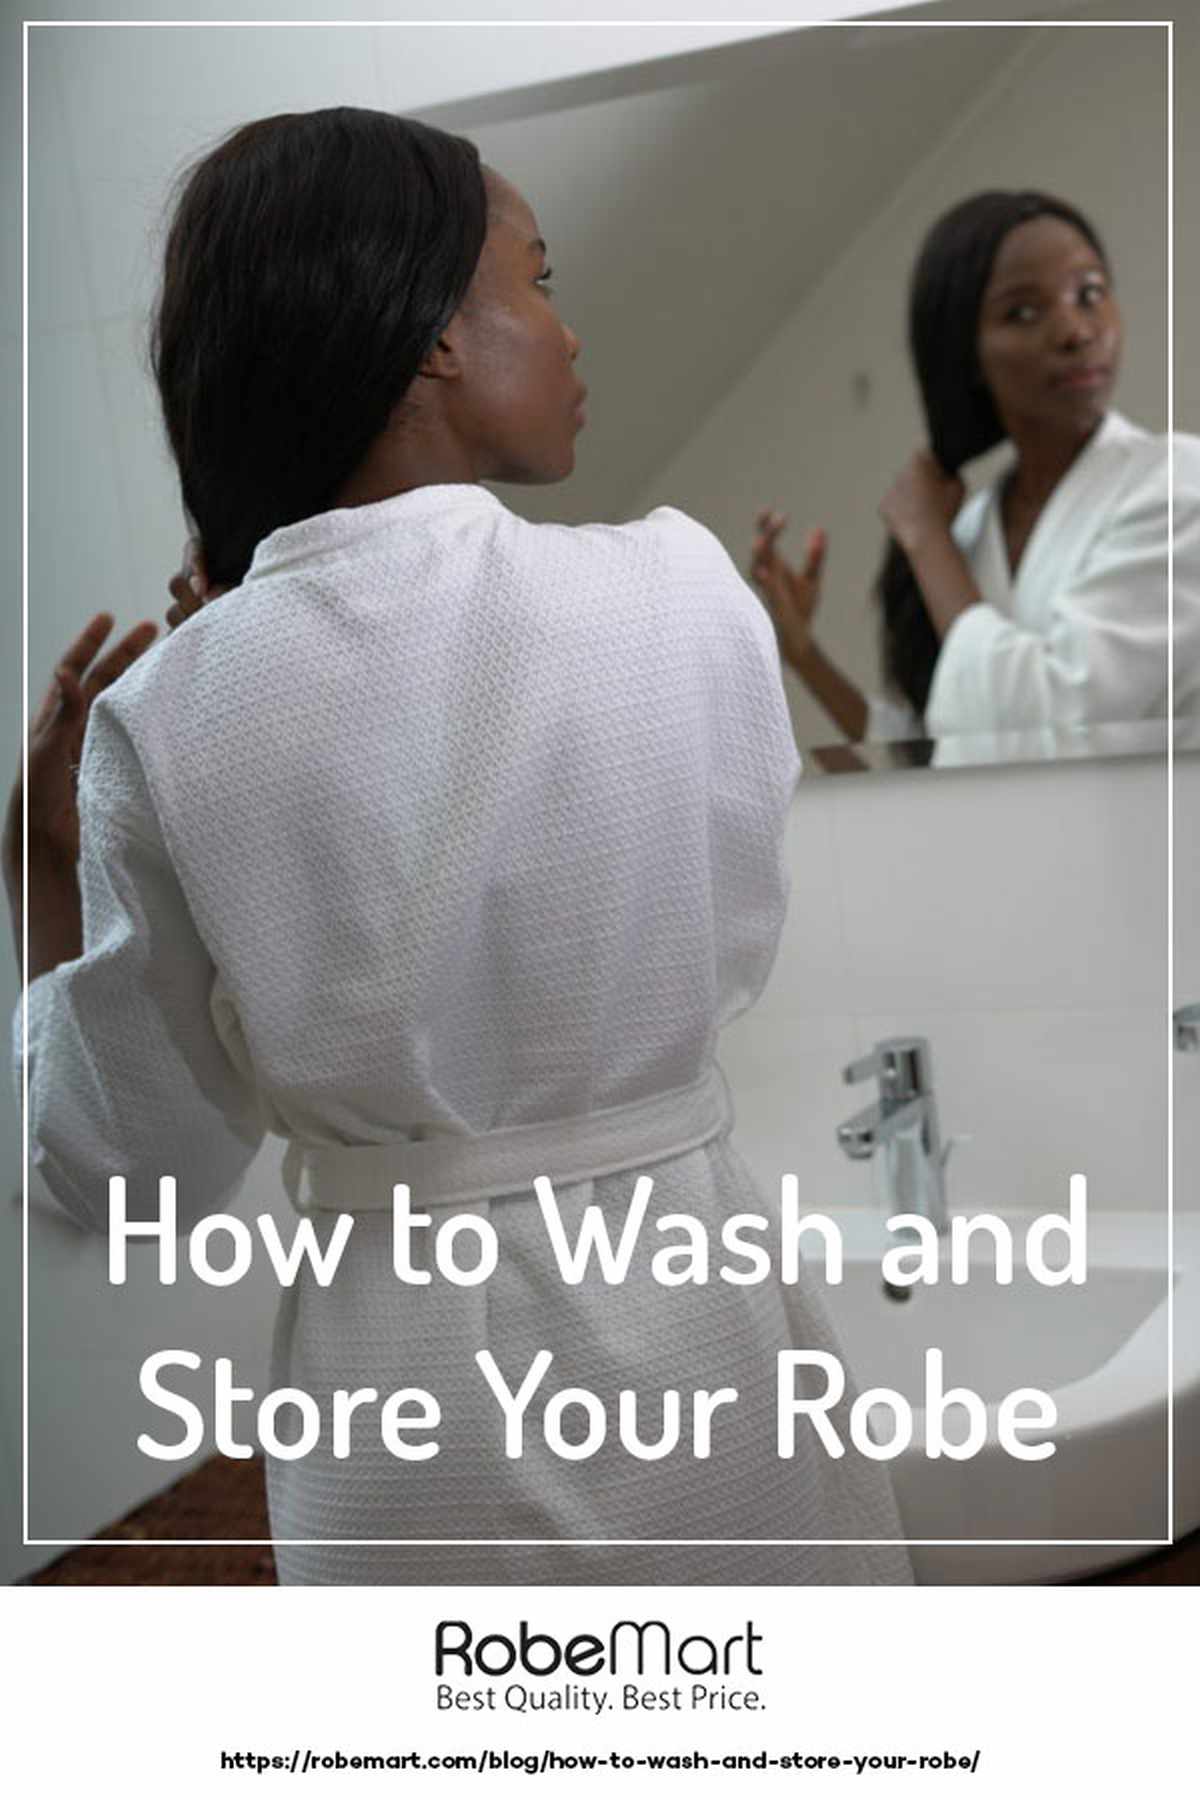 woman looking in the mirror | Types Of Fabric: How To Wash And Care For Your Towels, Robes, and Bathroom Textiles